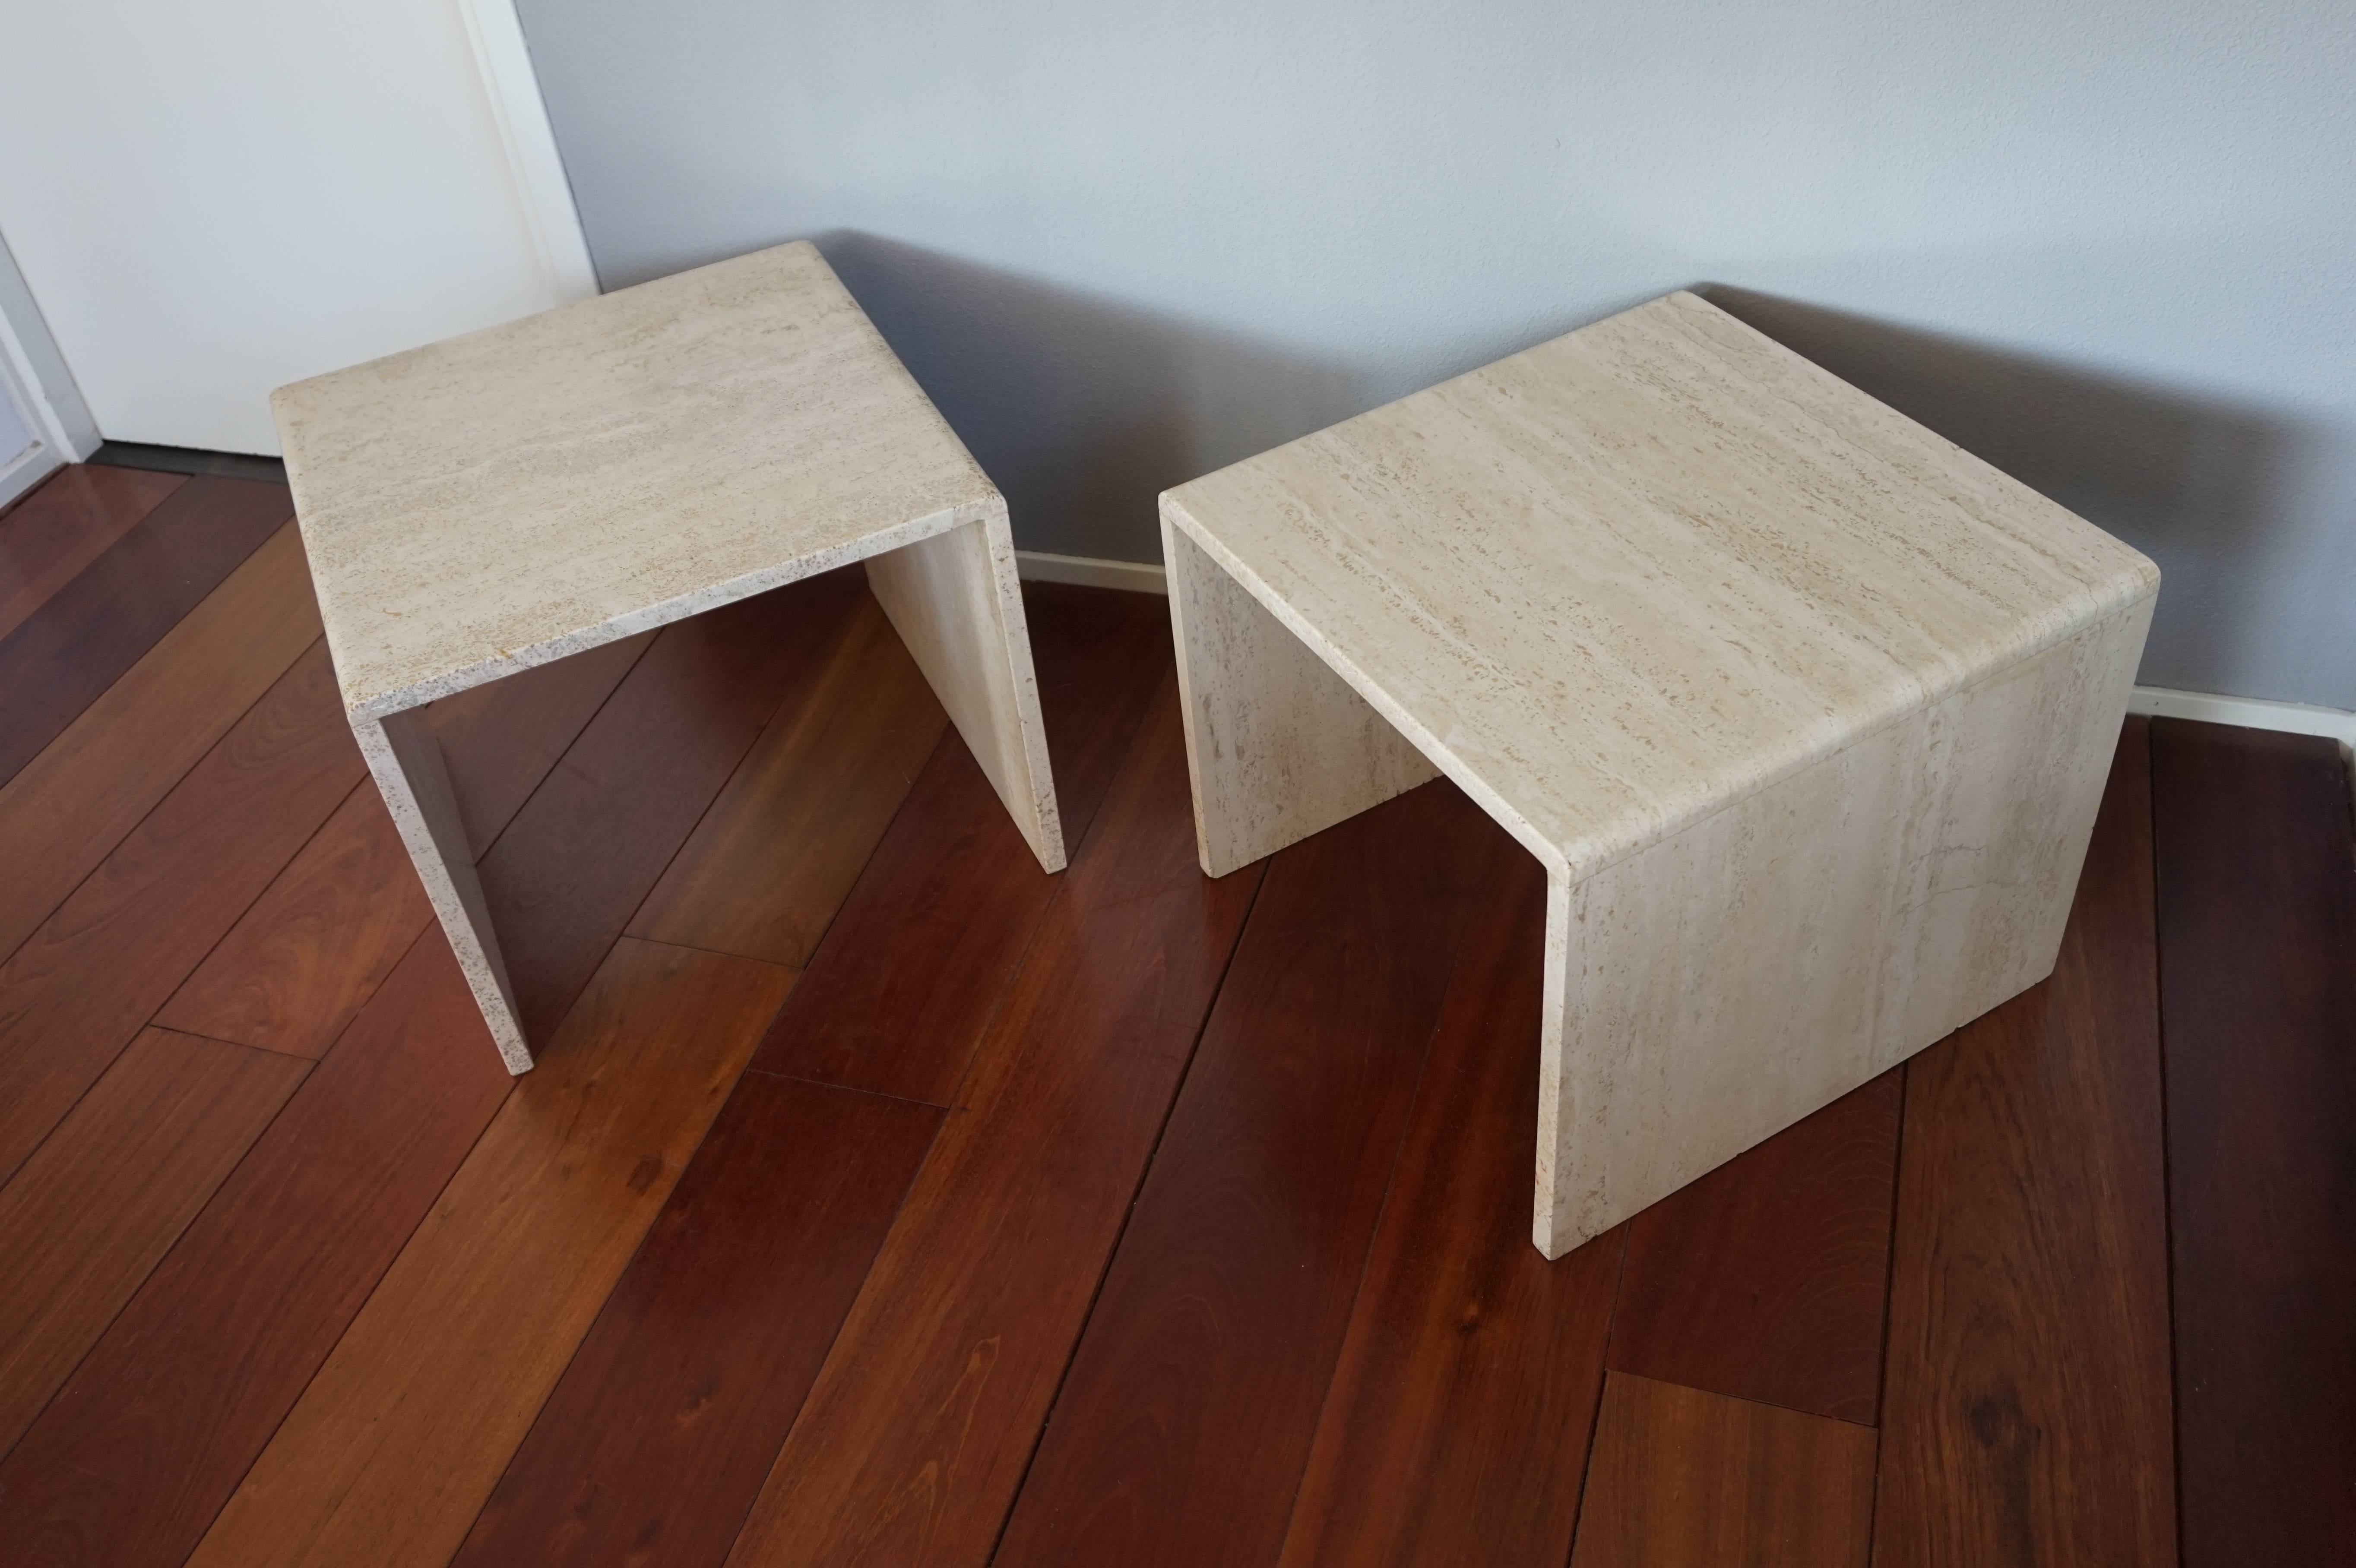 Stylish and functional pair of Italian, multipurpose hardstone tables.

This matching pair of angular travertine tables with rounded sides is in good to excellent condition. Because of their practical size and Minimalist design they can be used in